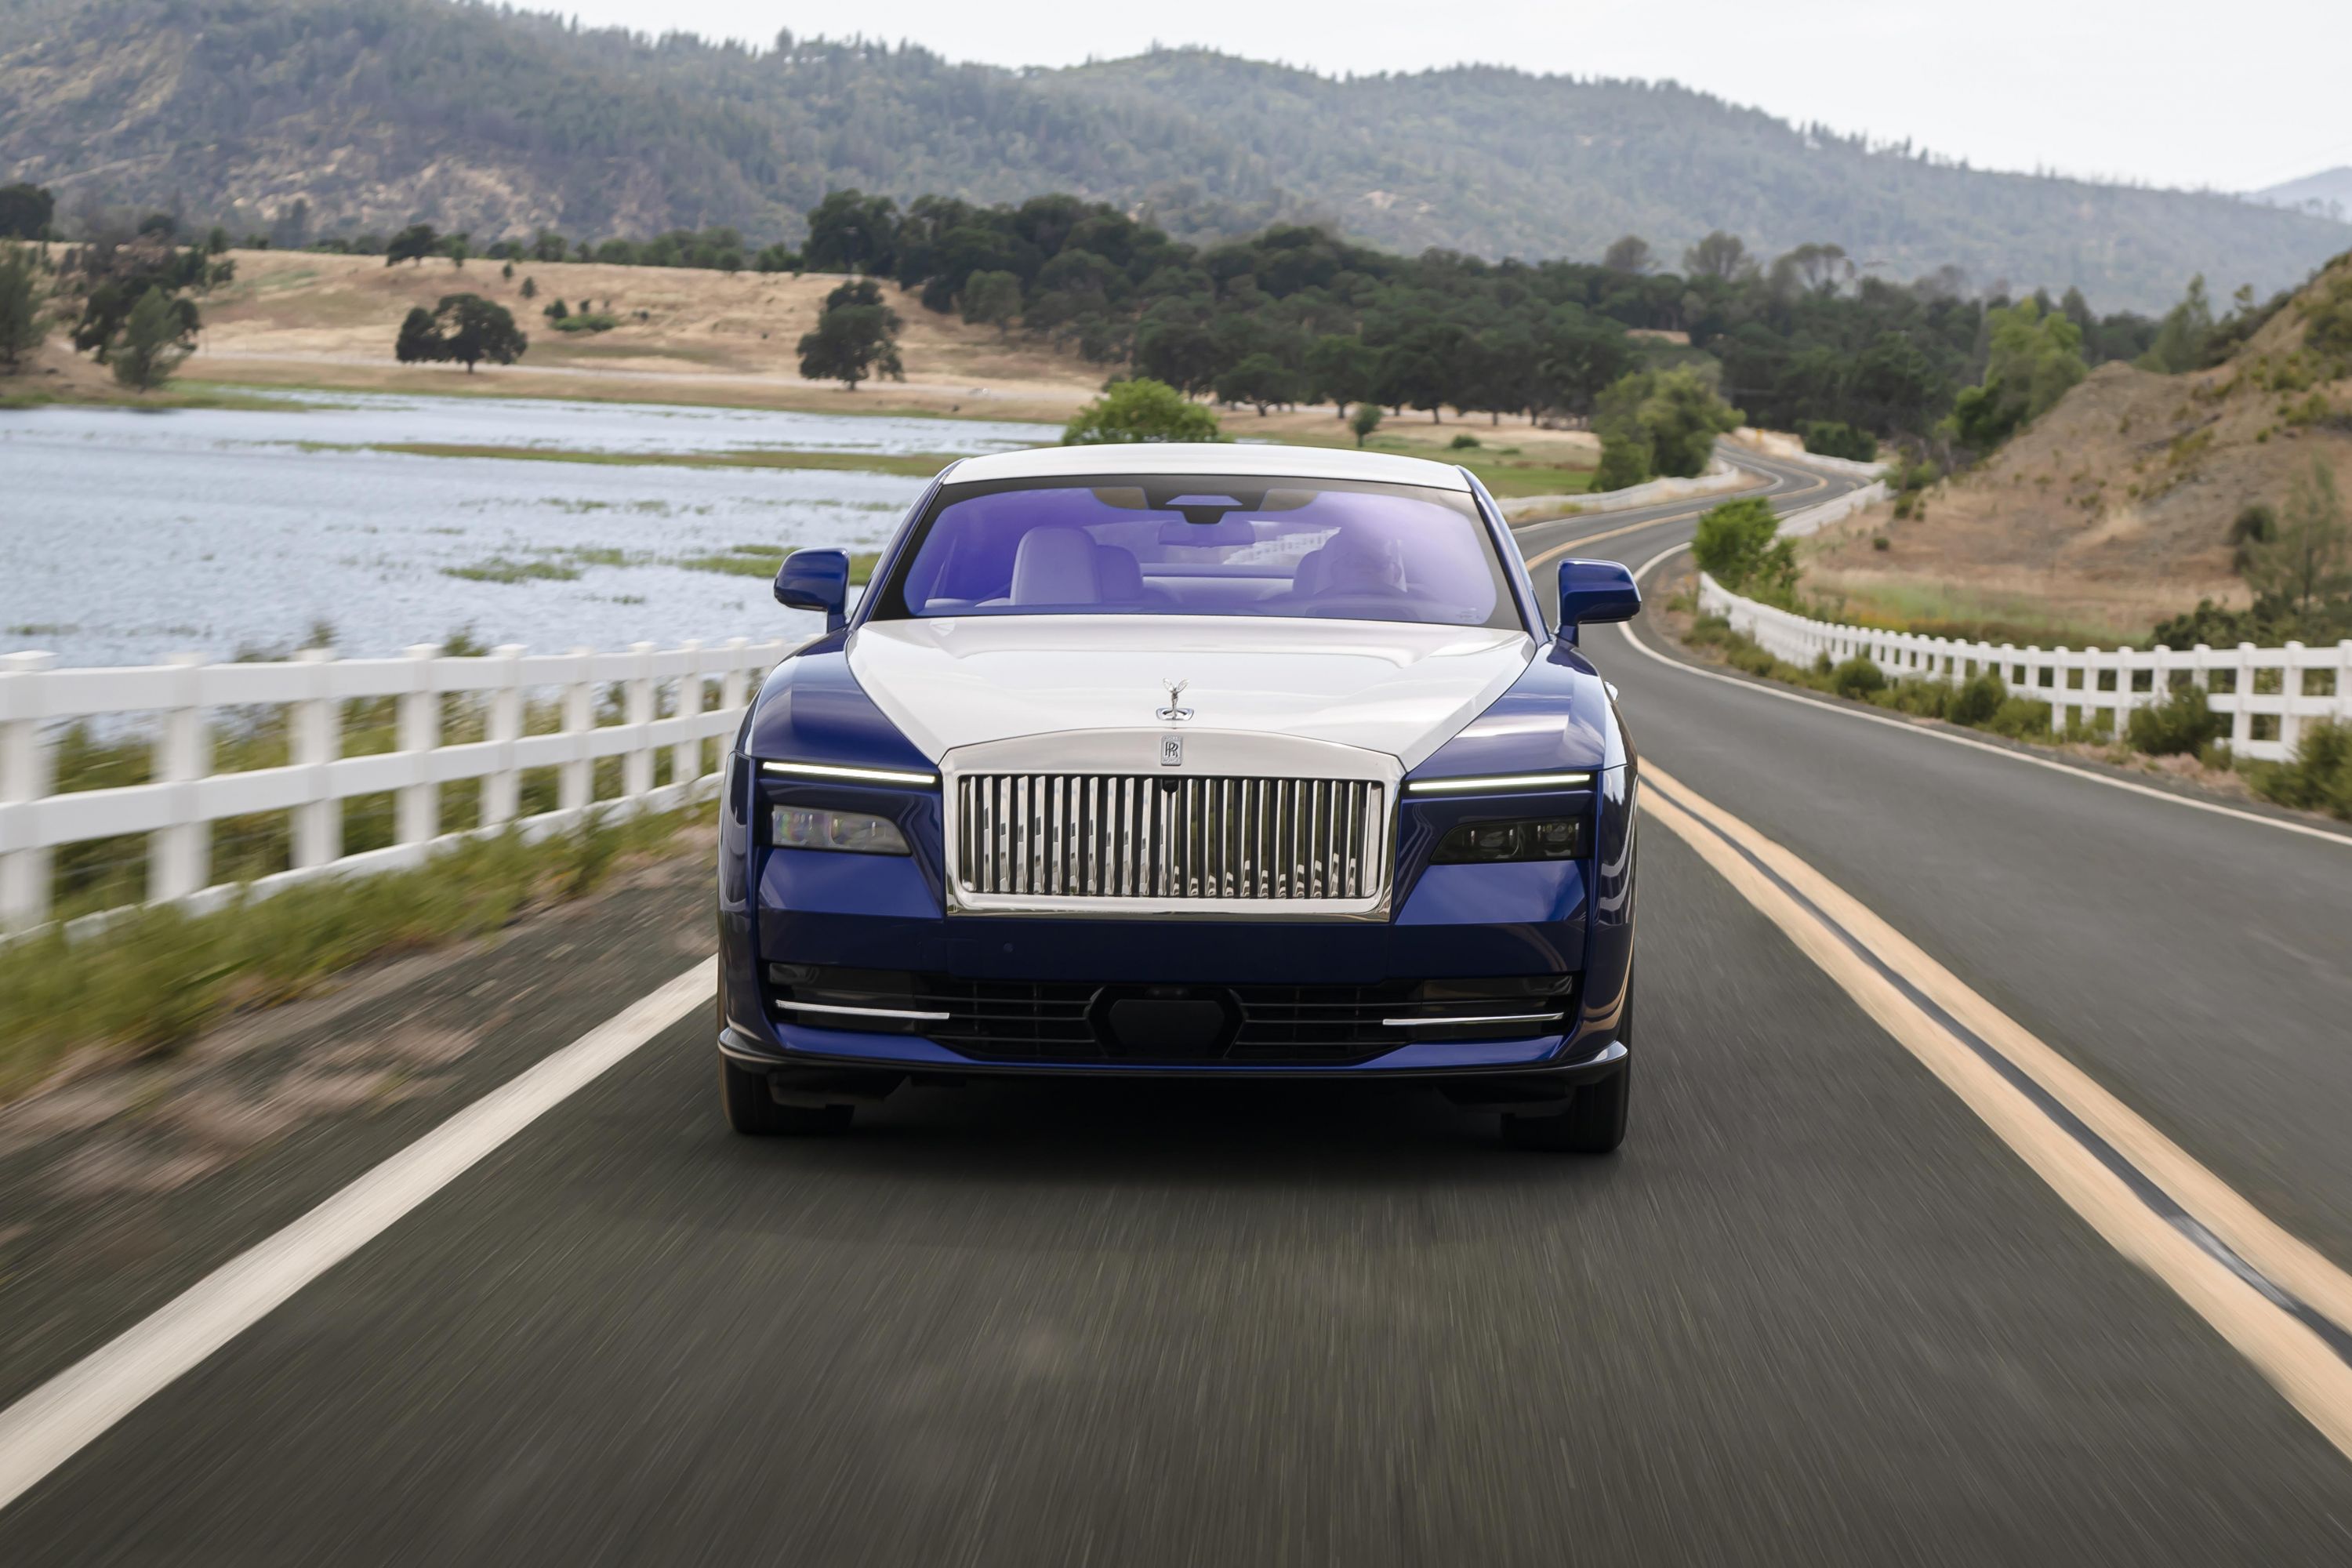 Rolls-Royce prices its first electric car for Australia | CarExpert